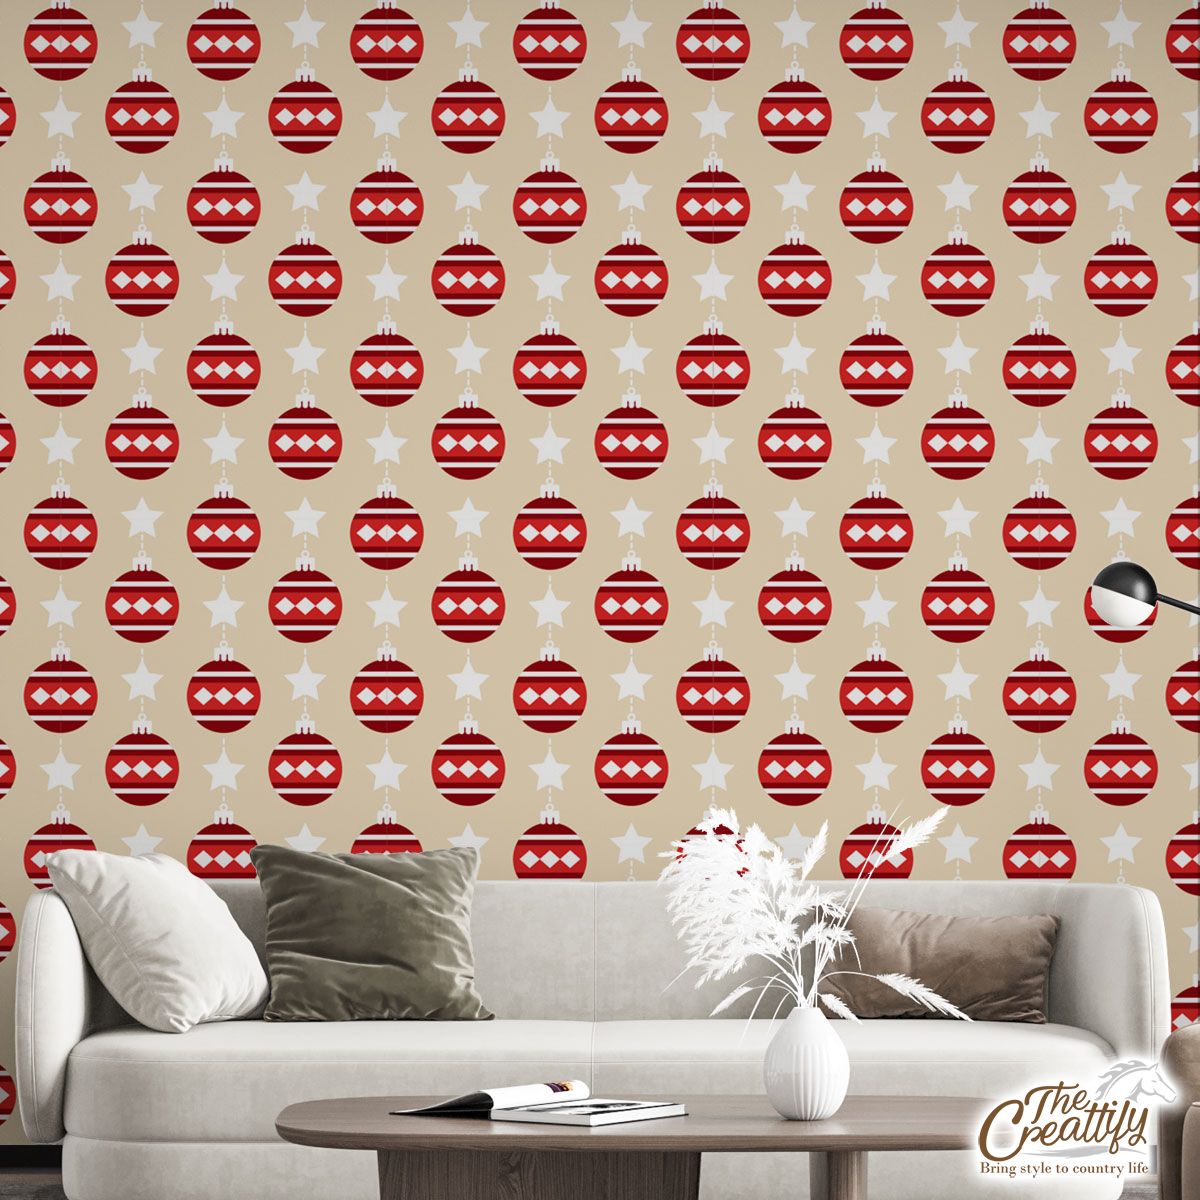 Christmas Balls Hanging With Star Seamless Pattern Wall Mural